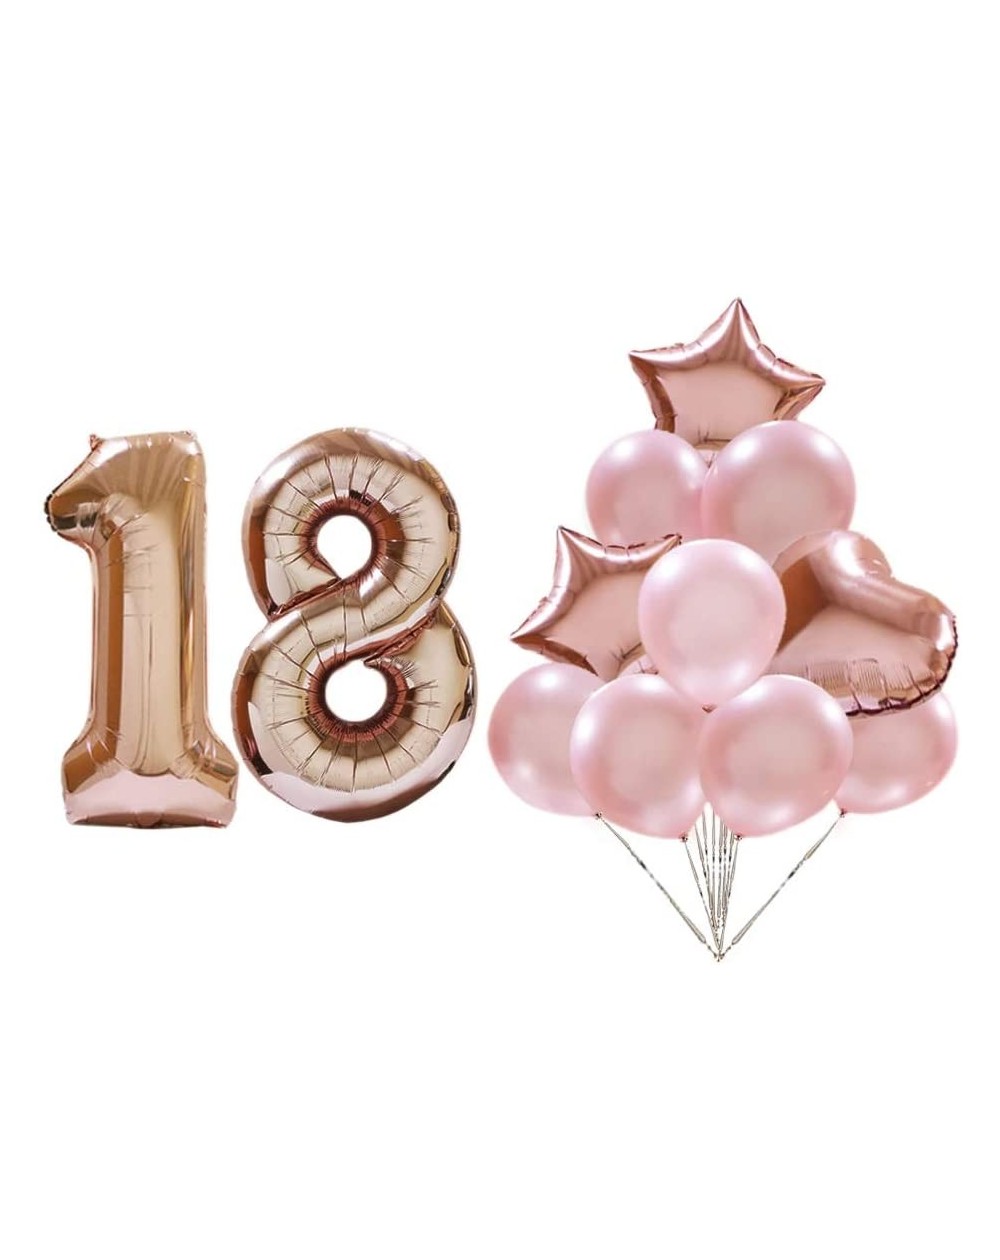 Balloons Rose Gold Number 18 Balloons with Metal Color Balloons Set-18th Birthday Decorations Party Supplies Balloon.18th Ann...